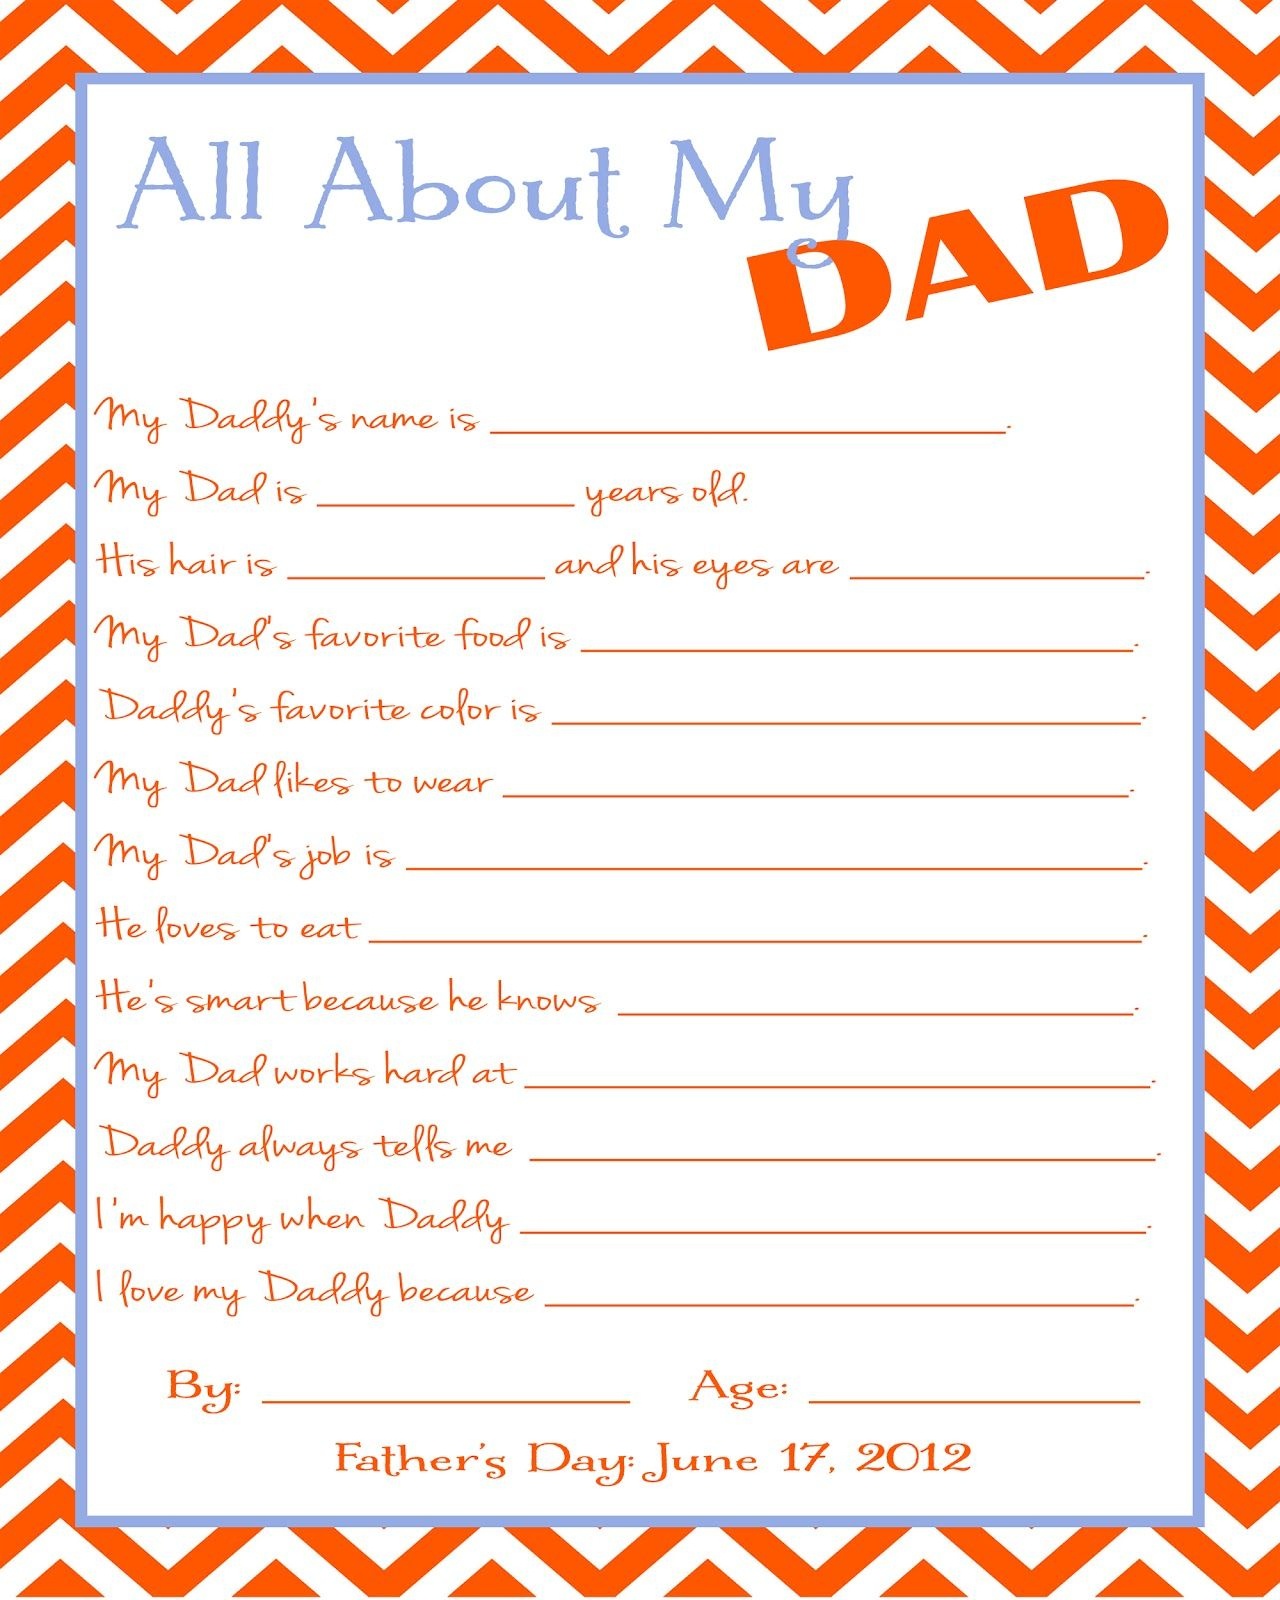 Free Father&amp;#039;s Day Printable What A Cute Idea | Kid Ideas | Father&amp;#039;s - Free Printable Dad Questionnaire